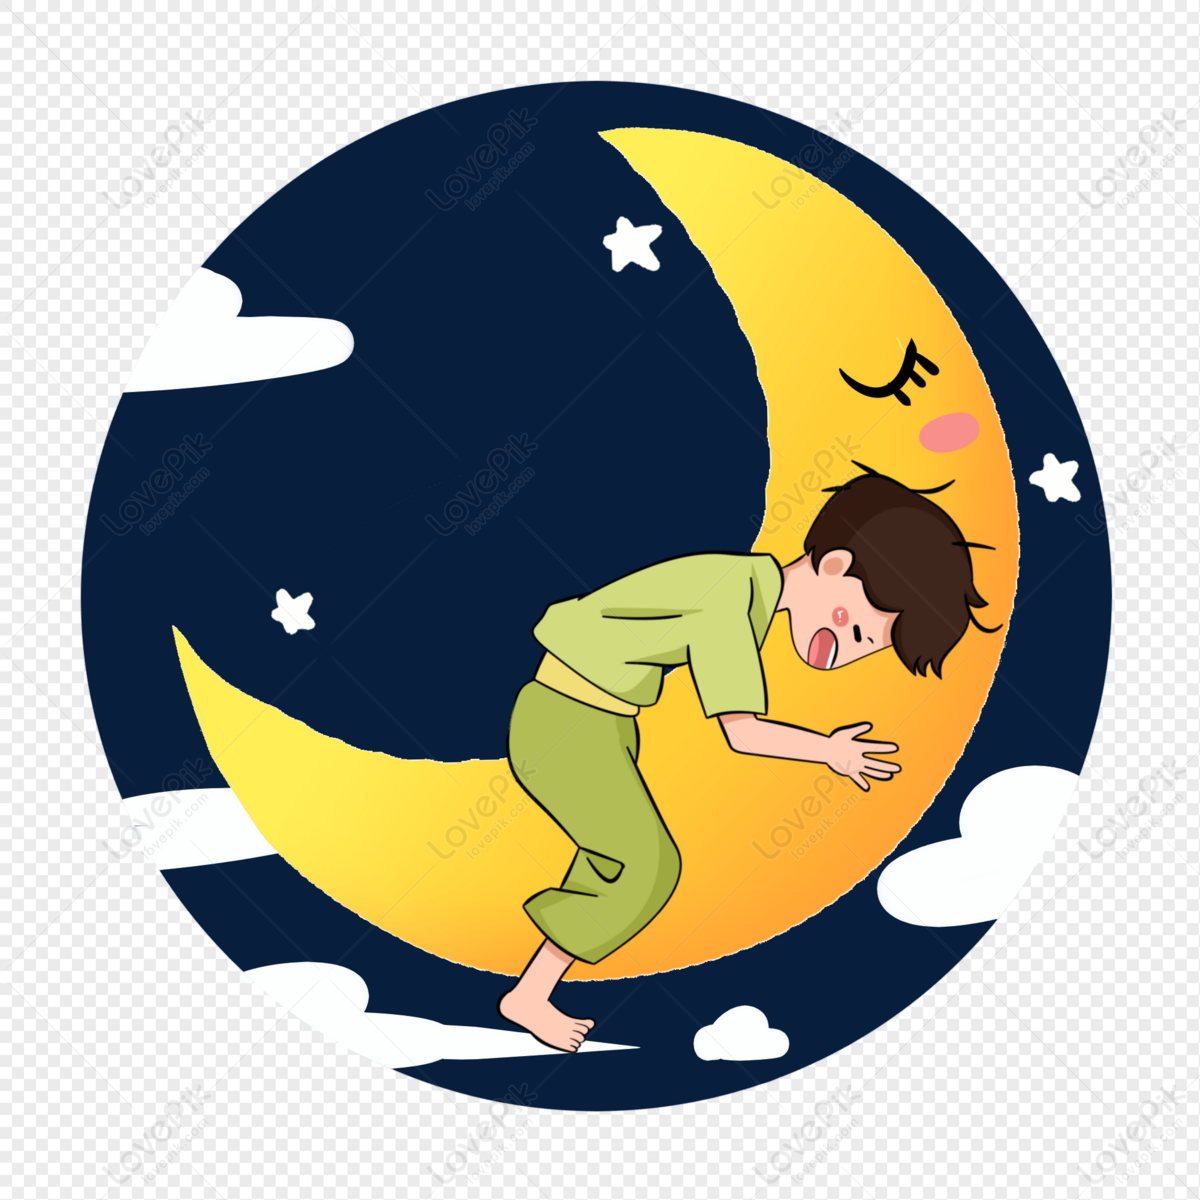 Man Holding A Moon Sleeping Cartoon Hand Drawn PNG Hd Transparent Image And  Clipart Image For Free Download - Lovepik | 401593884